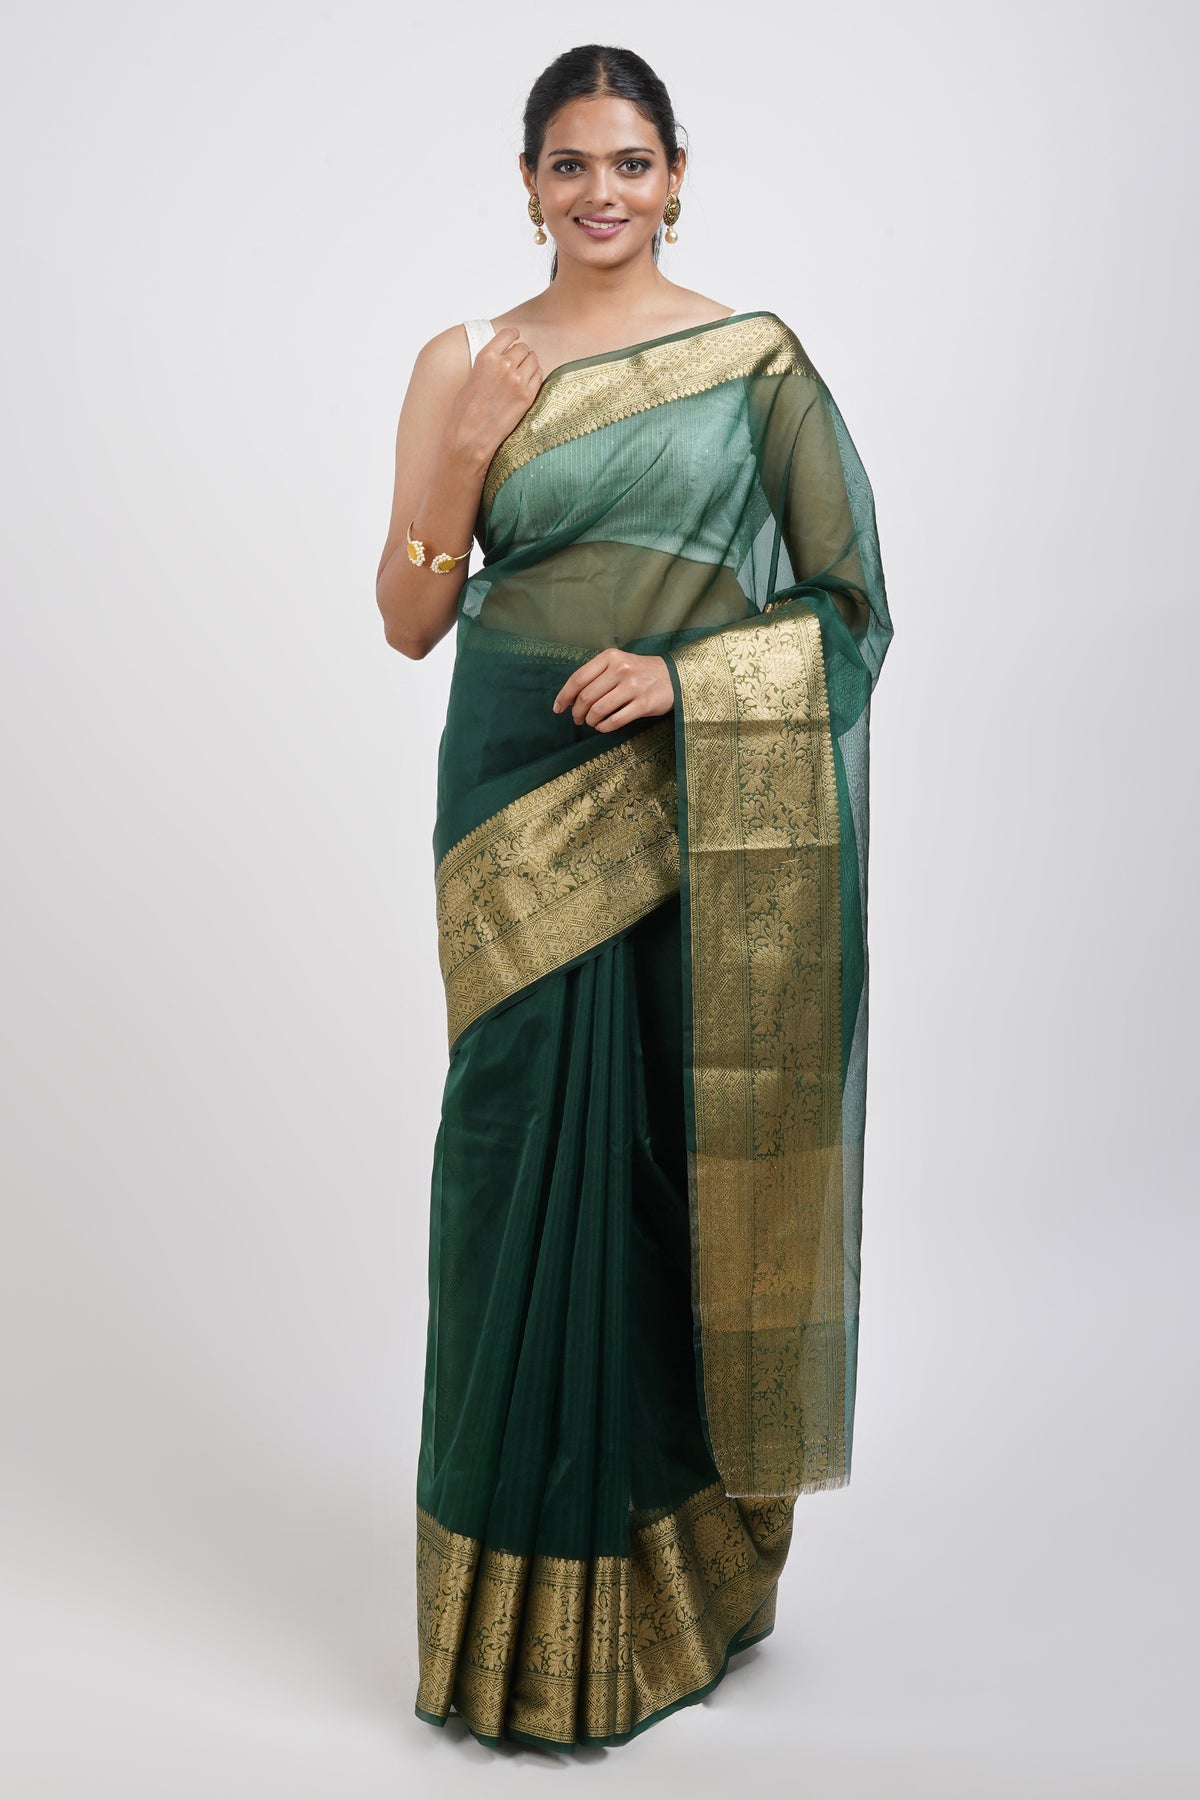 𝗕𝗮𝗵𝗮𝗮𝗿 Featuring our bottle green organza saree paired with a  chanderi base blouse with gold dori and aari embroidery on it. Styling &… |  Instagram